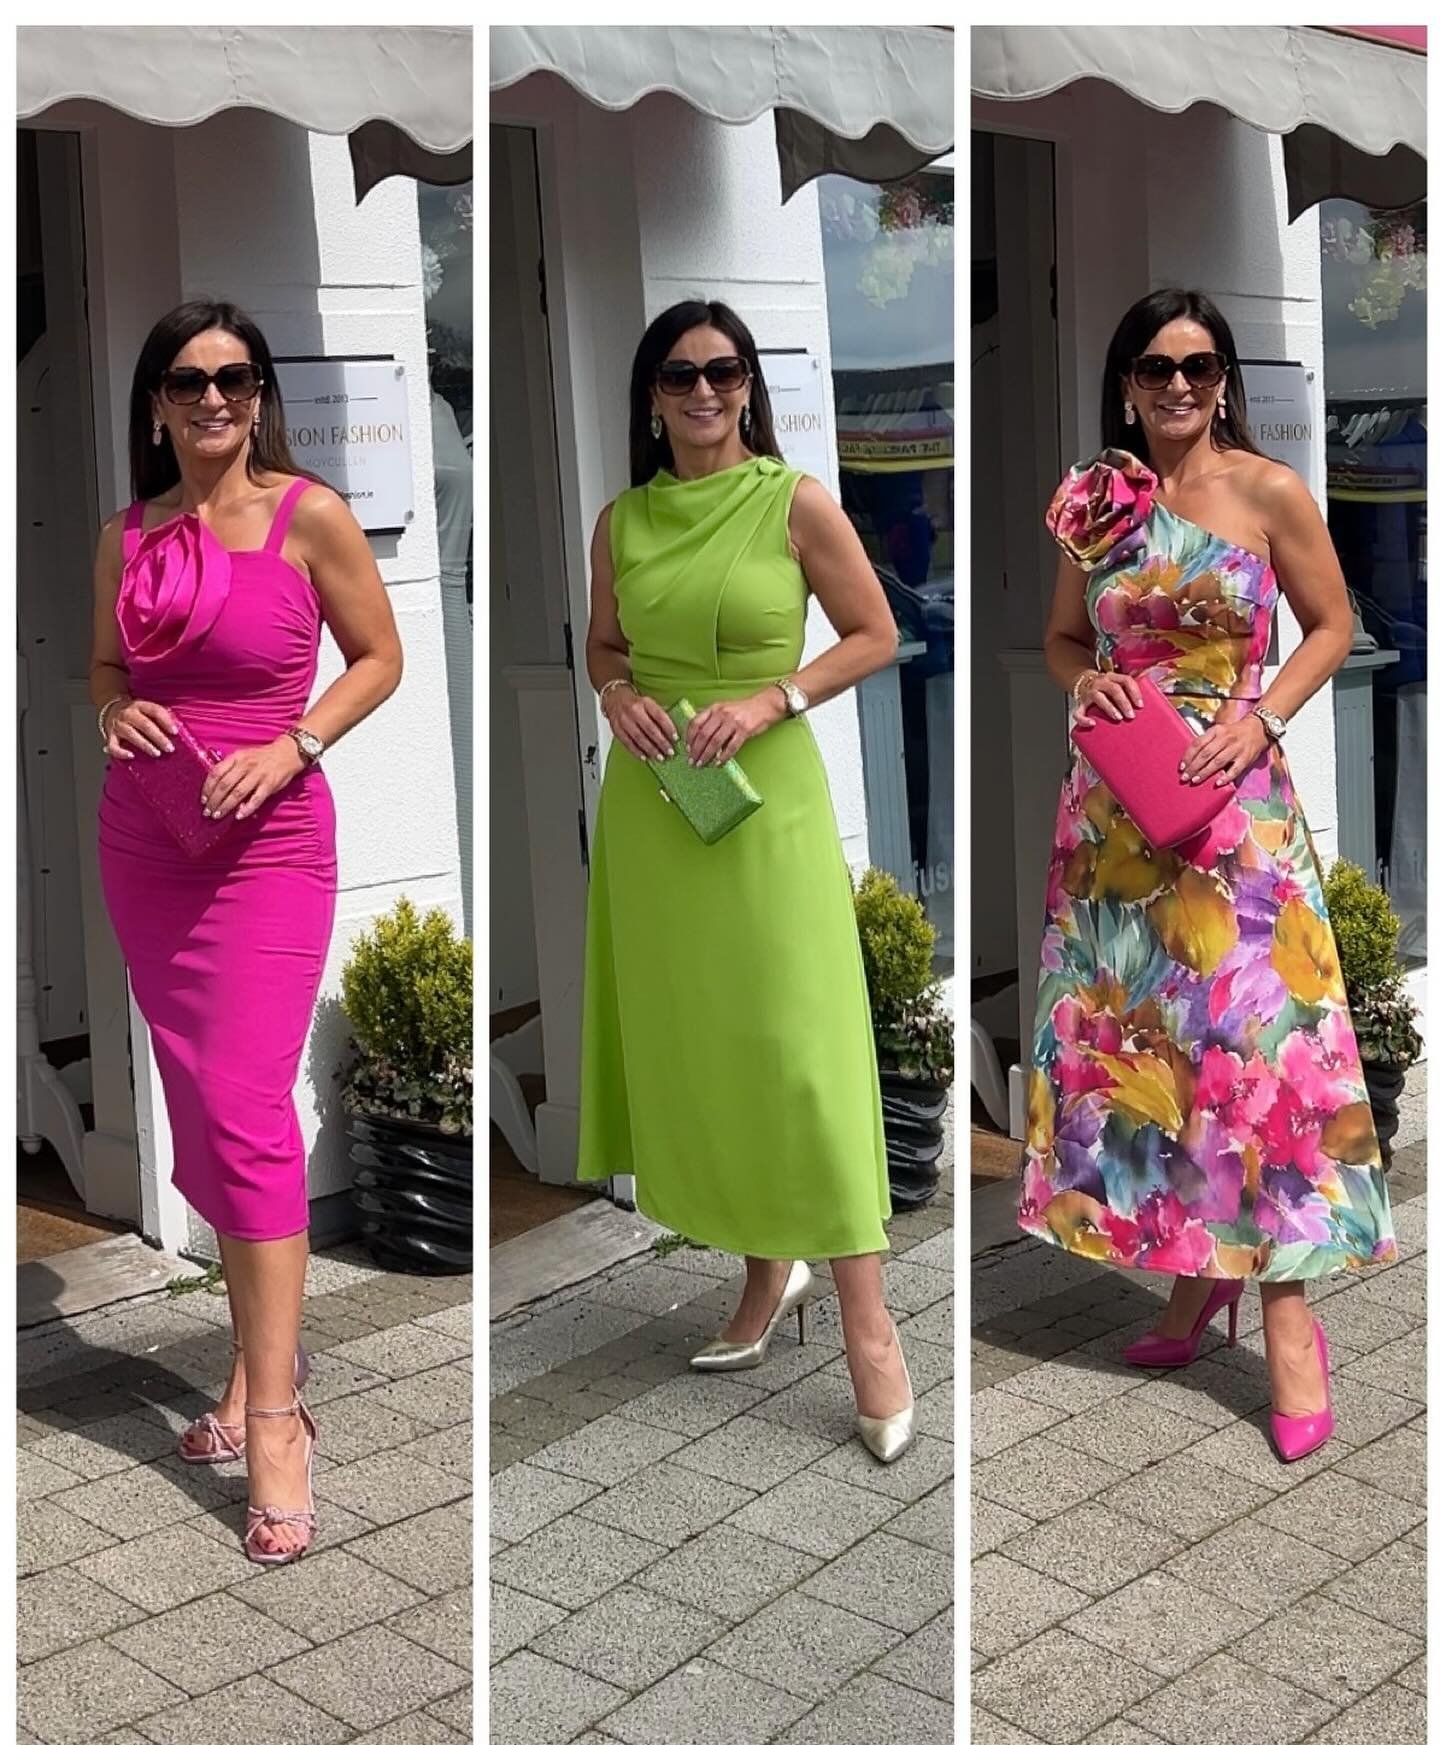 ✨🩷 Lots of new arrivals &hellip;which is your favourite?
1, 2 or 3?
Shop online or visit us in store 
Fiona x 
#newarrivals #summerstyle #wedding